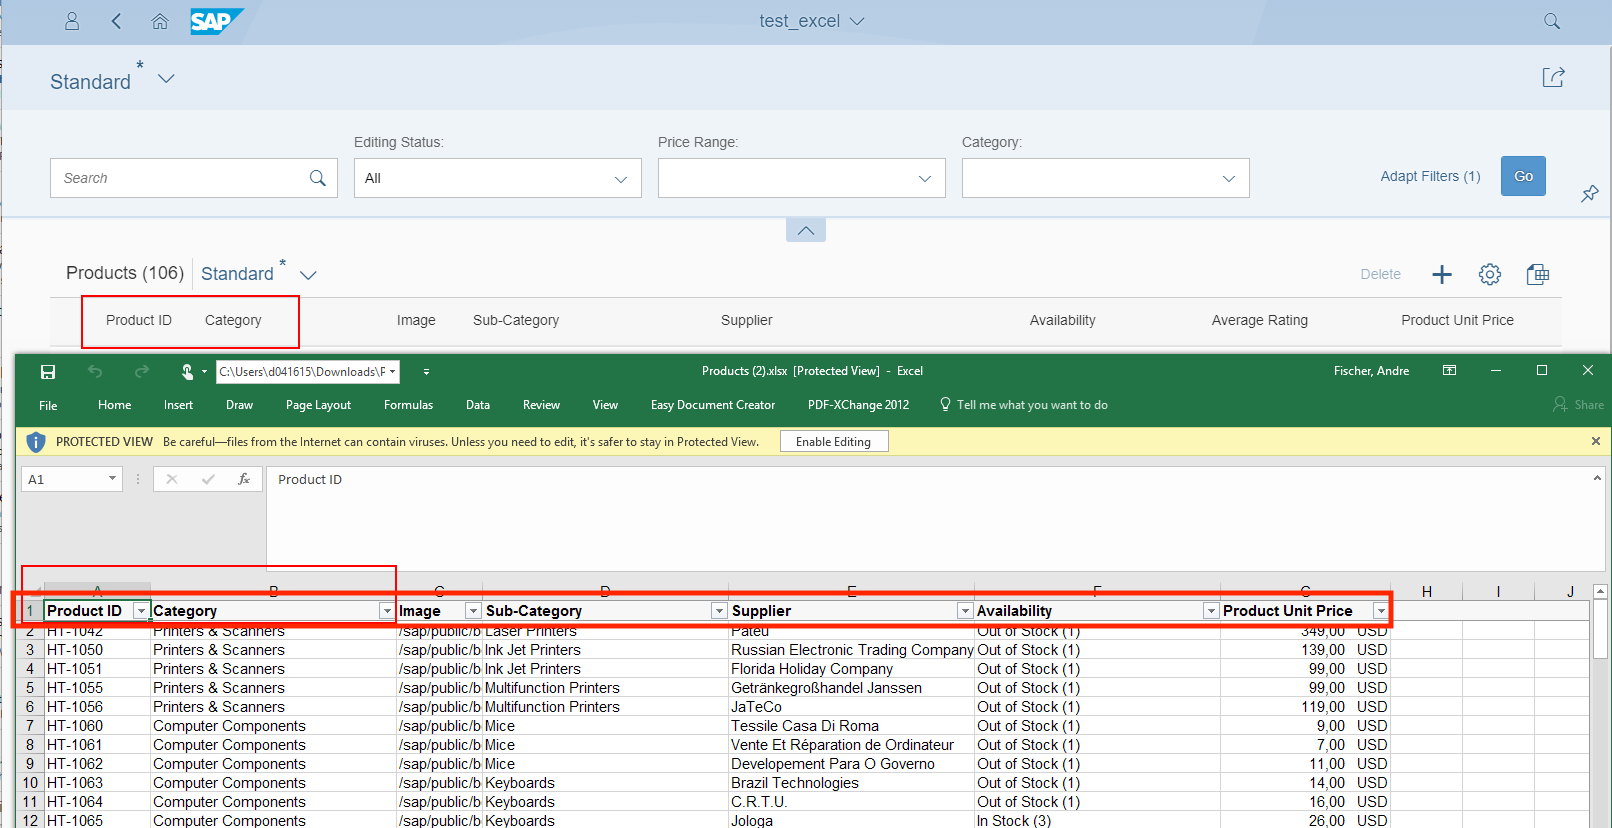 Sap Calculation Spreadsheet Throughout New Excel Export Functionality Available  Sap Blogs